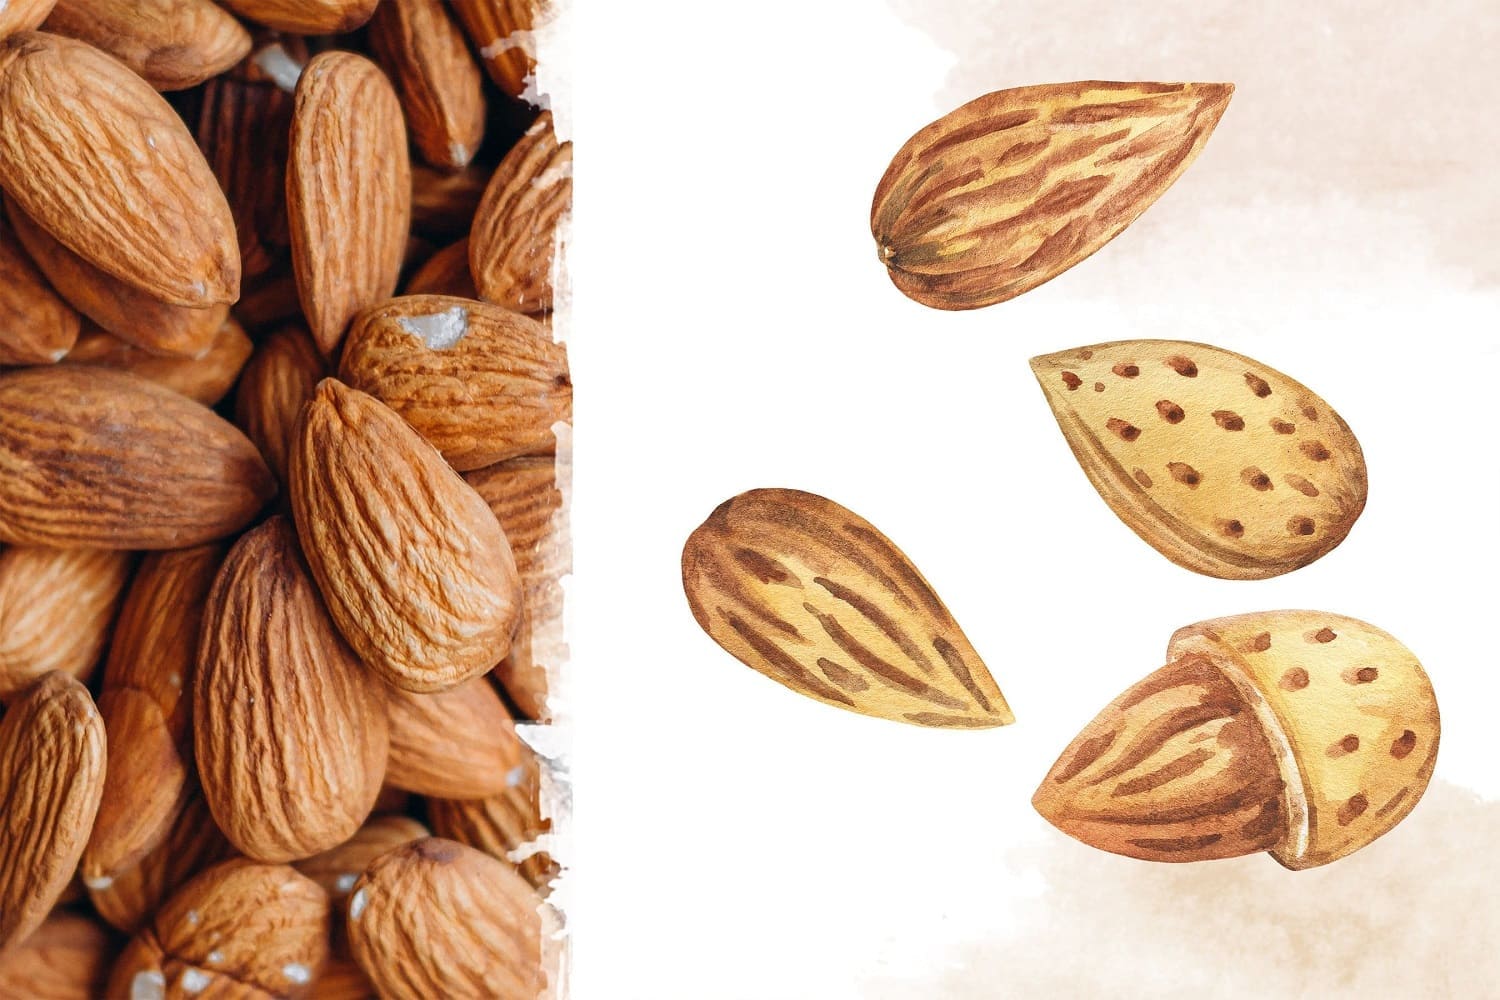 Almond nuts close-up.